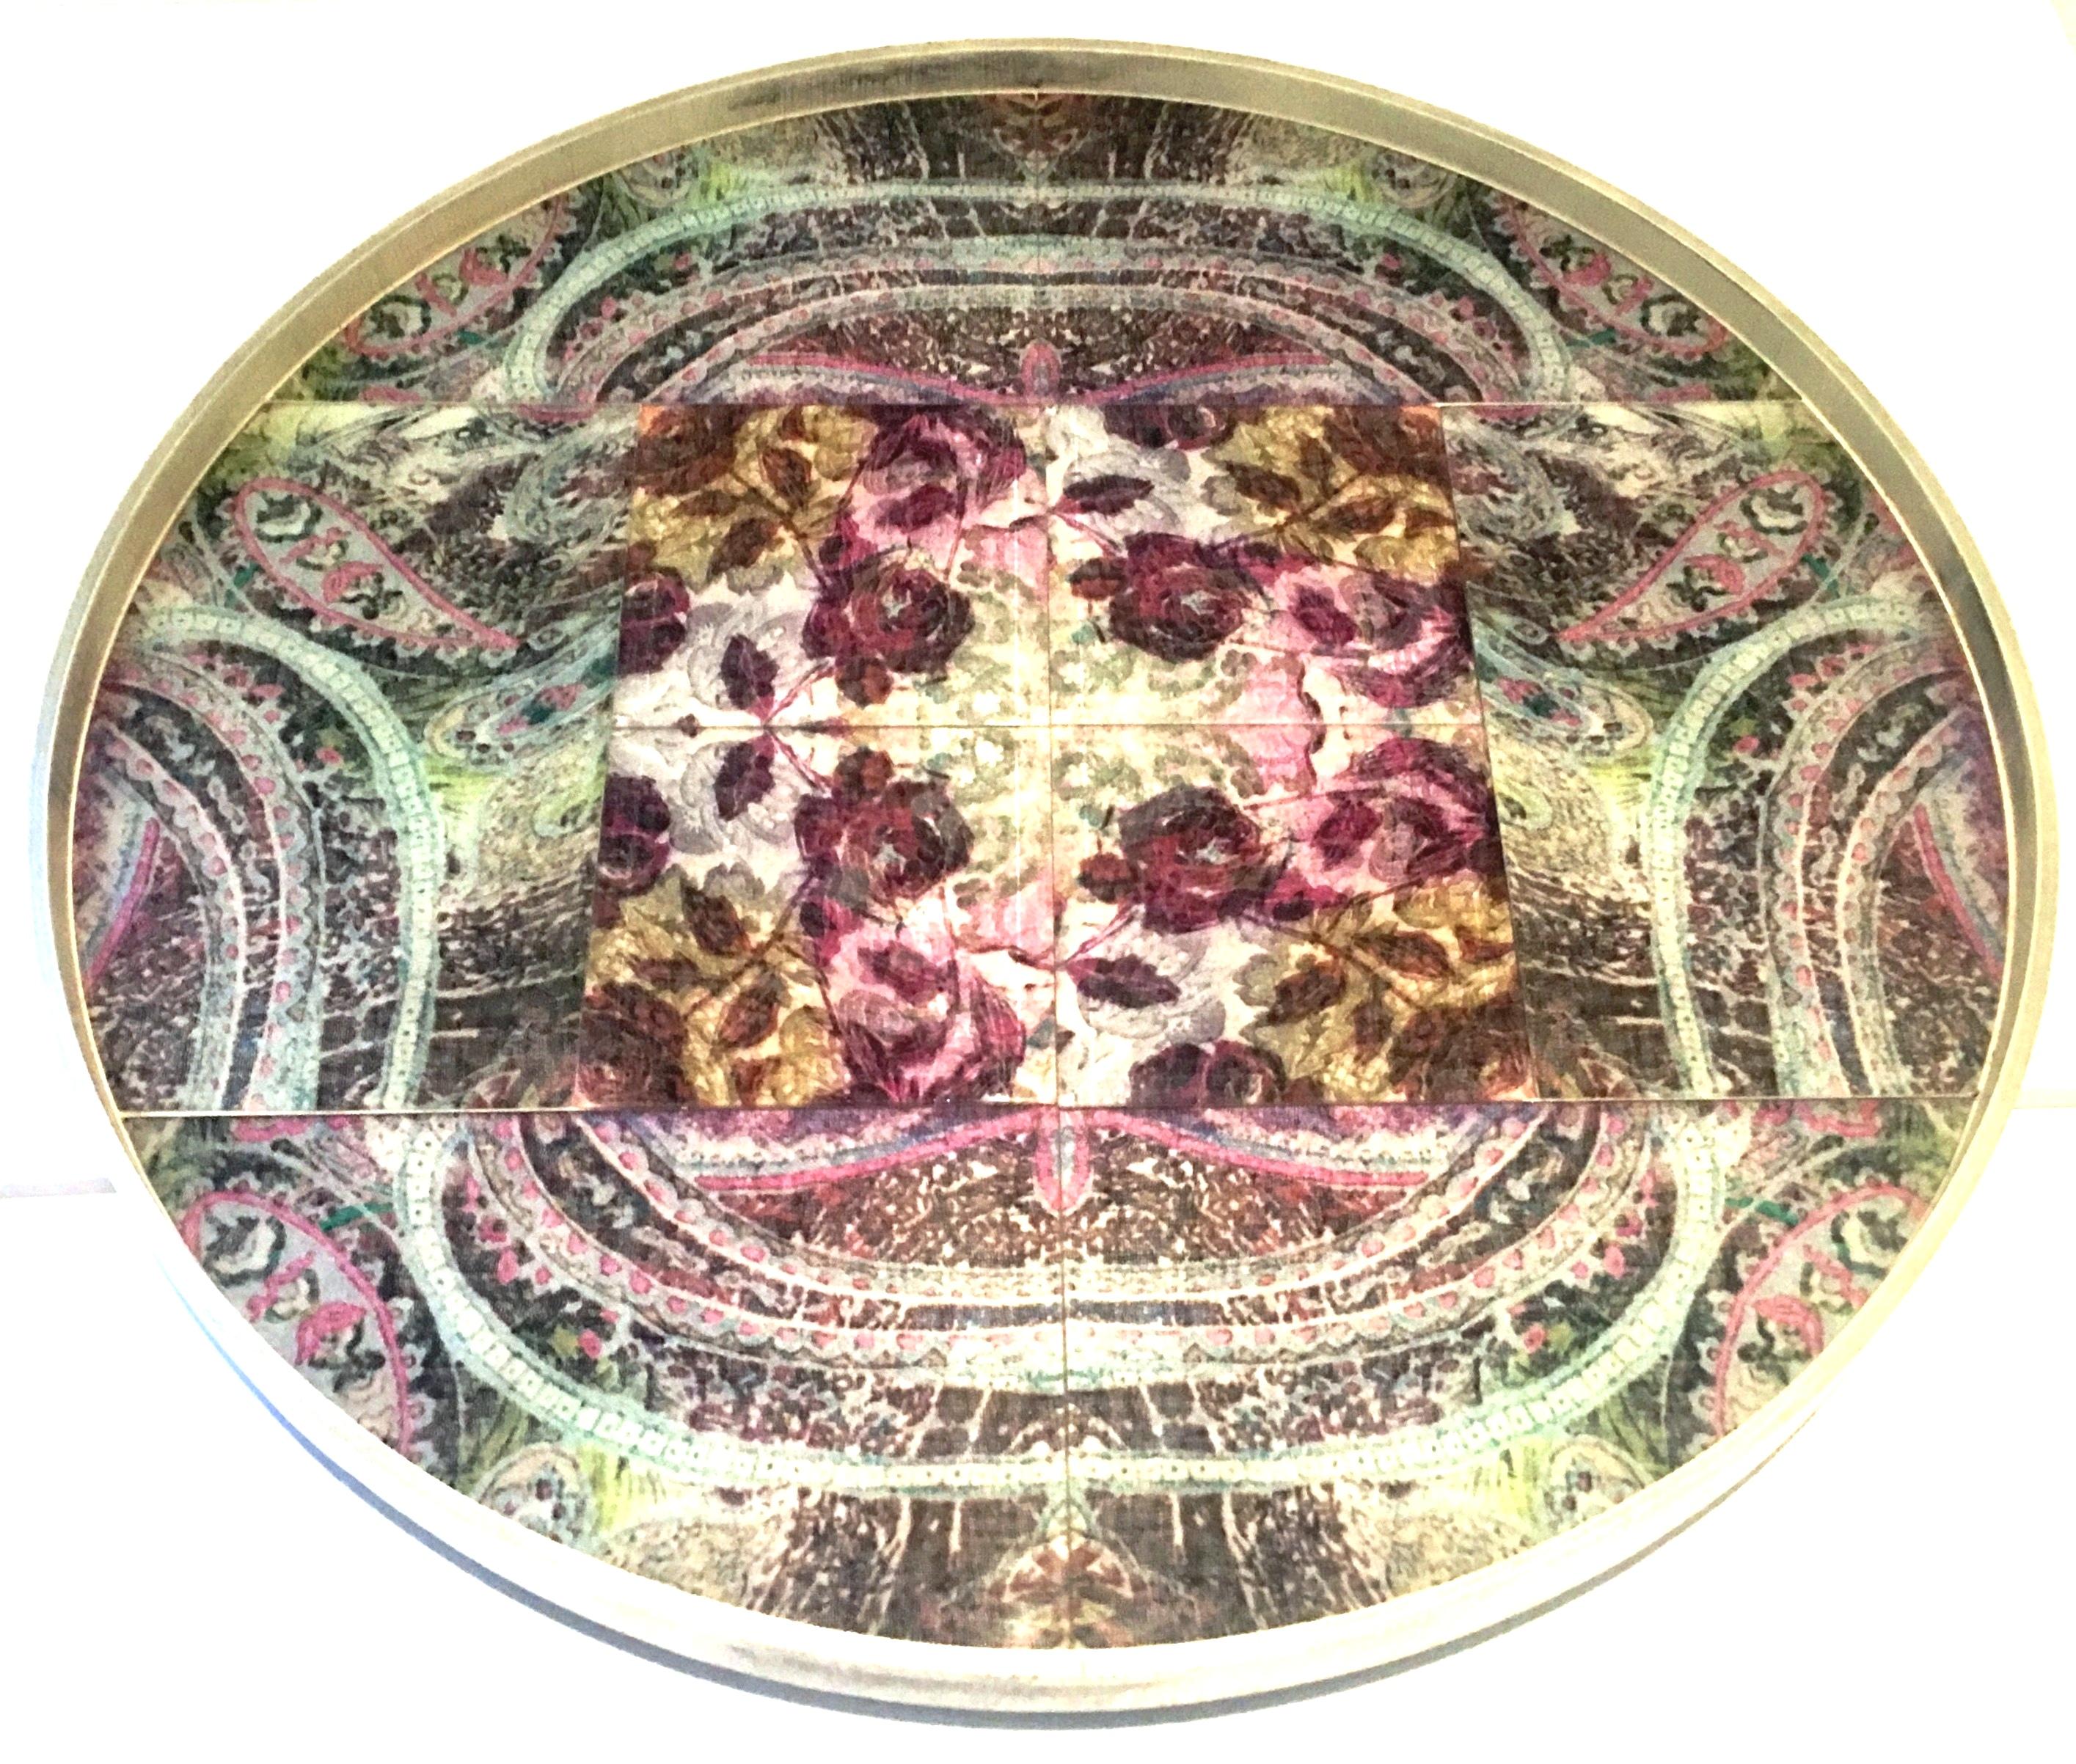 21st century and new monumental wood, glass and printed linen round lazy Susan center tray. This finely crafted piece features a wood base with intentional distressed natural finish with paisley printed linen under pillowed glass tile. The rotating